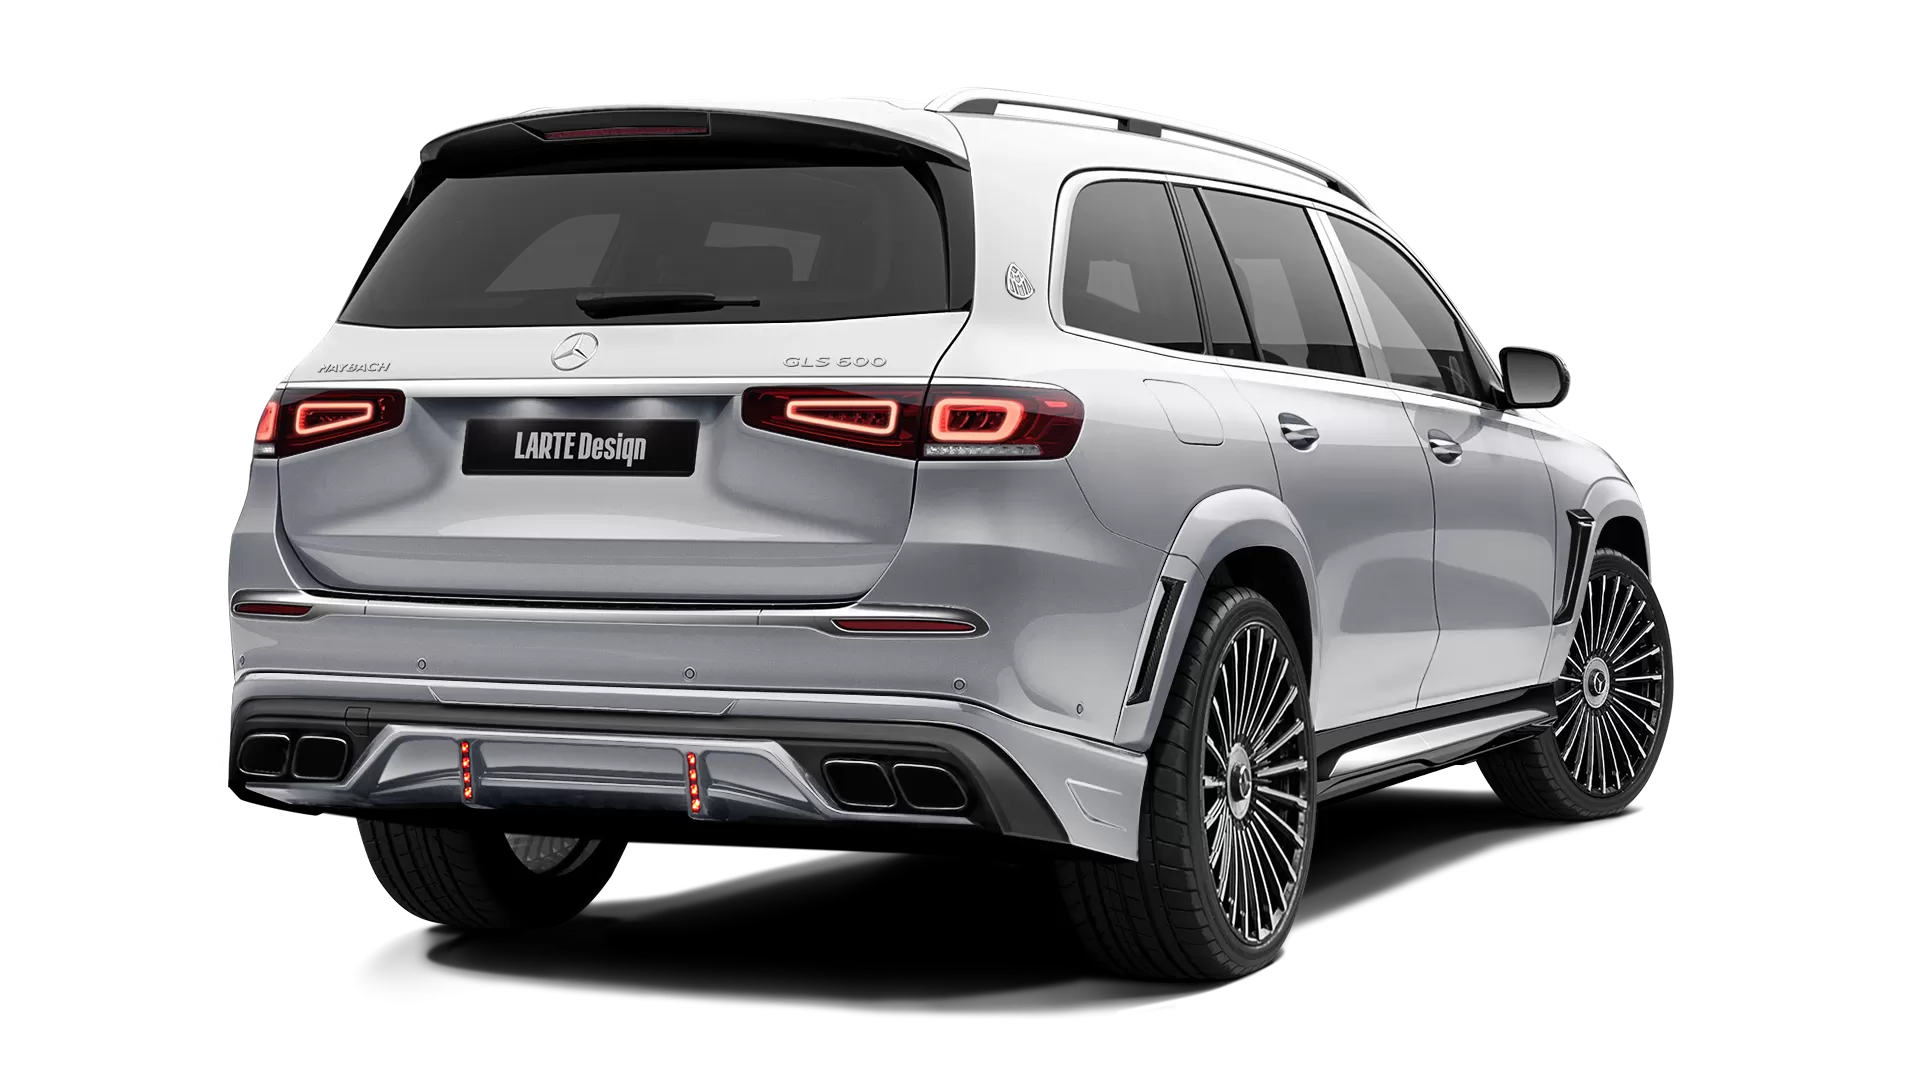 Mercedes Maybach GLS 600 with painted body kit: rear view shown in High Tech Silver & Diamond White